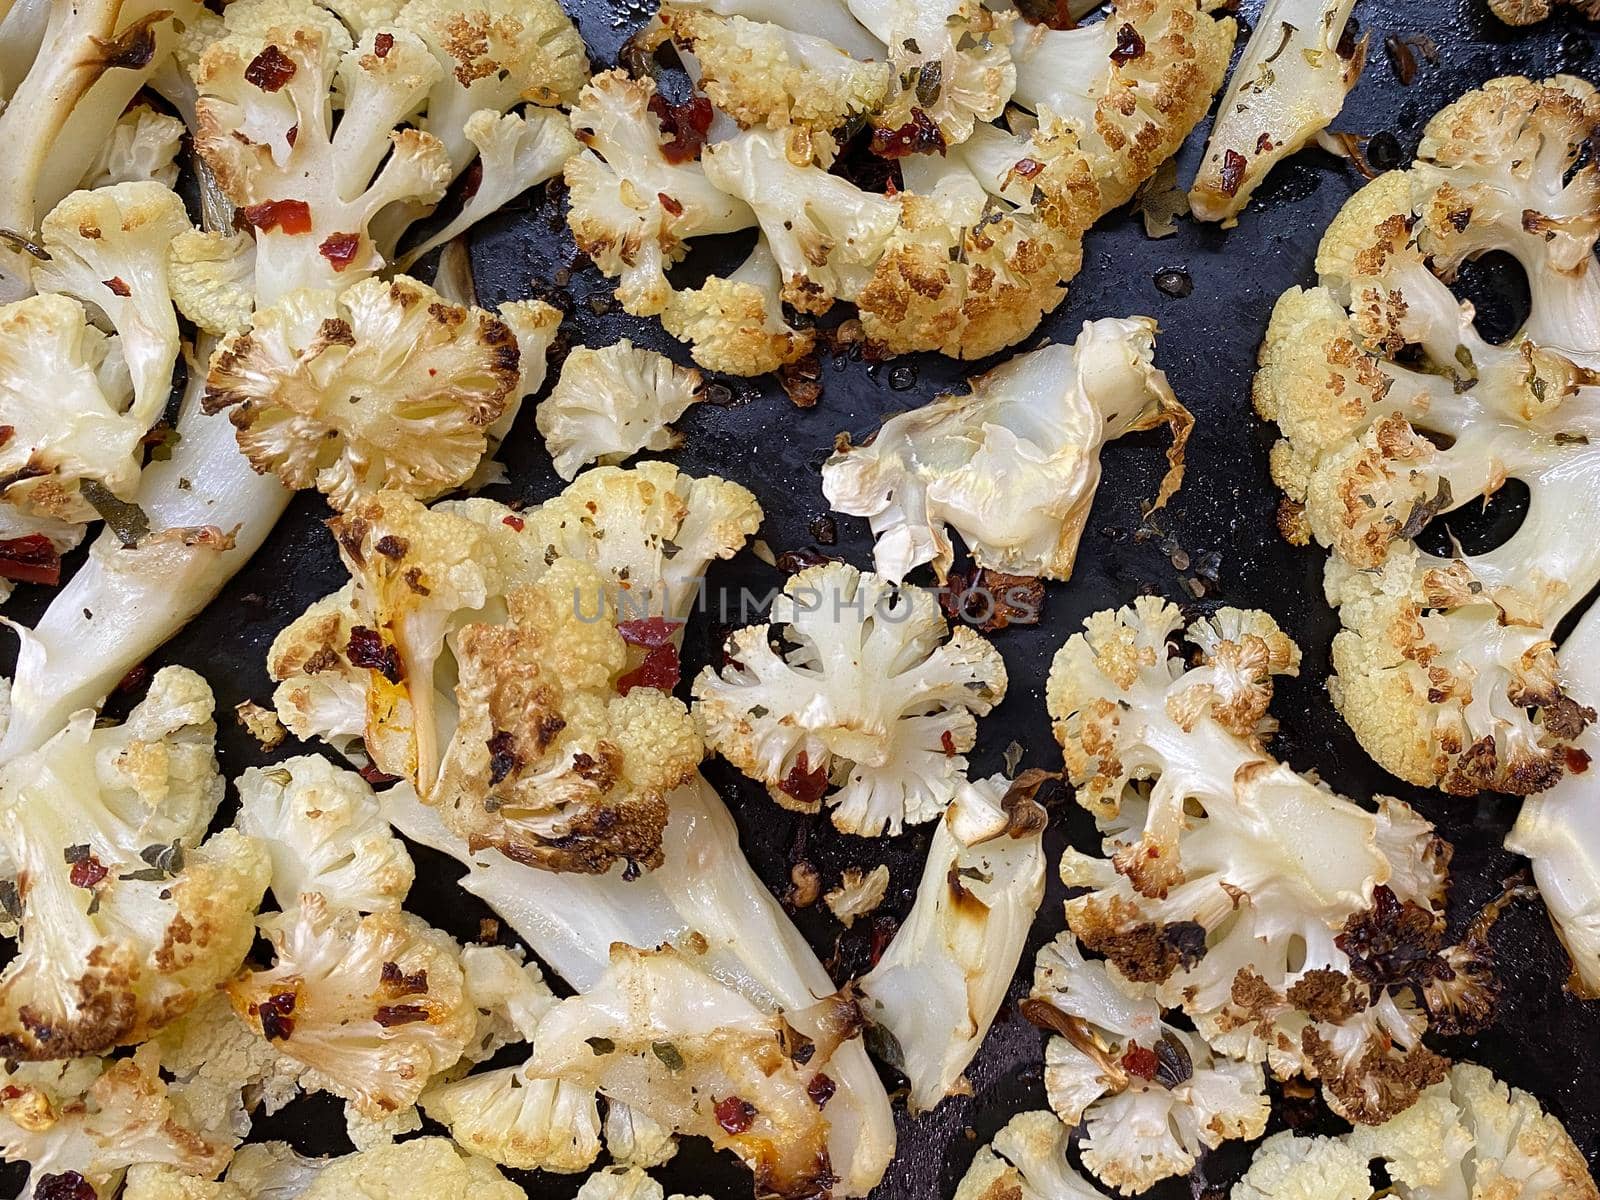 Cauliflower steaks baked with olive oil, herbs and spices on a black baking sheet background. by Proxima13